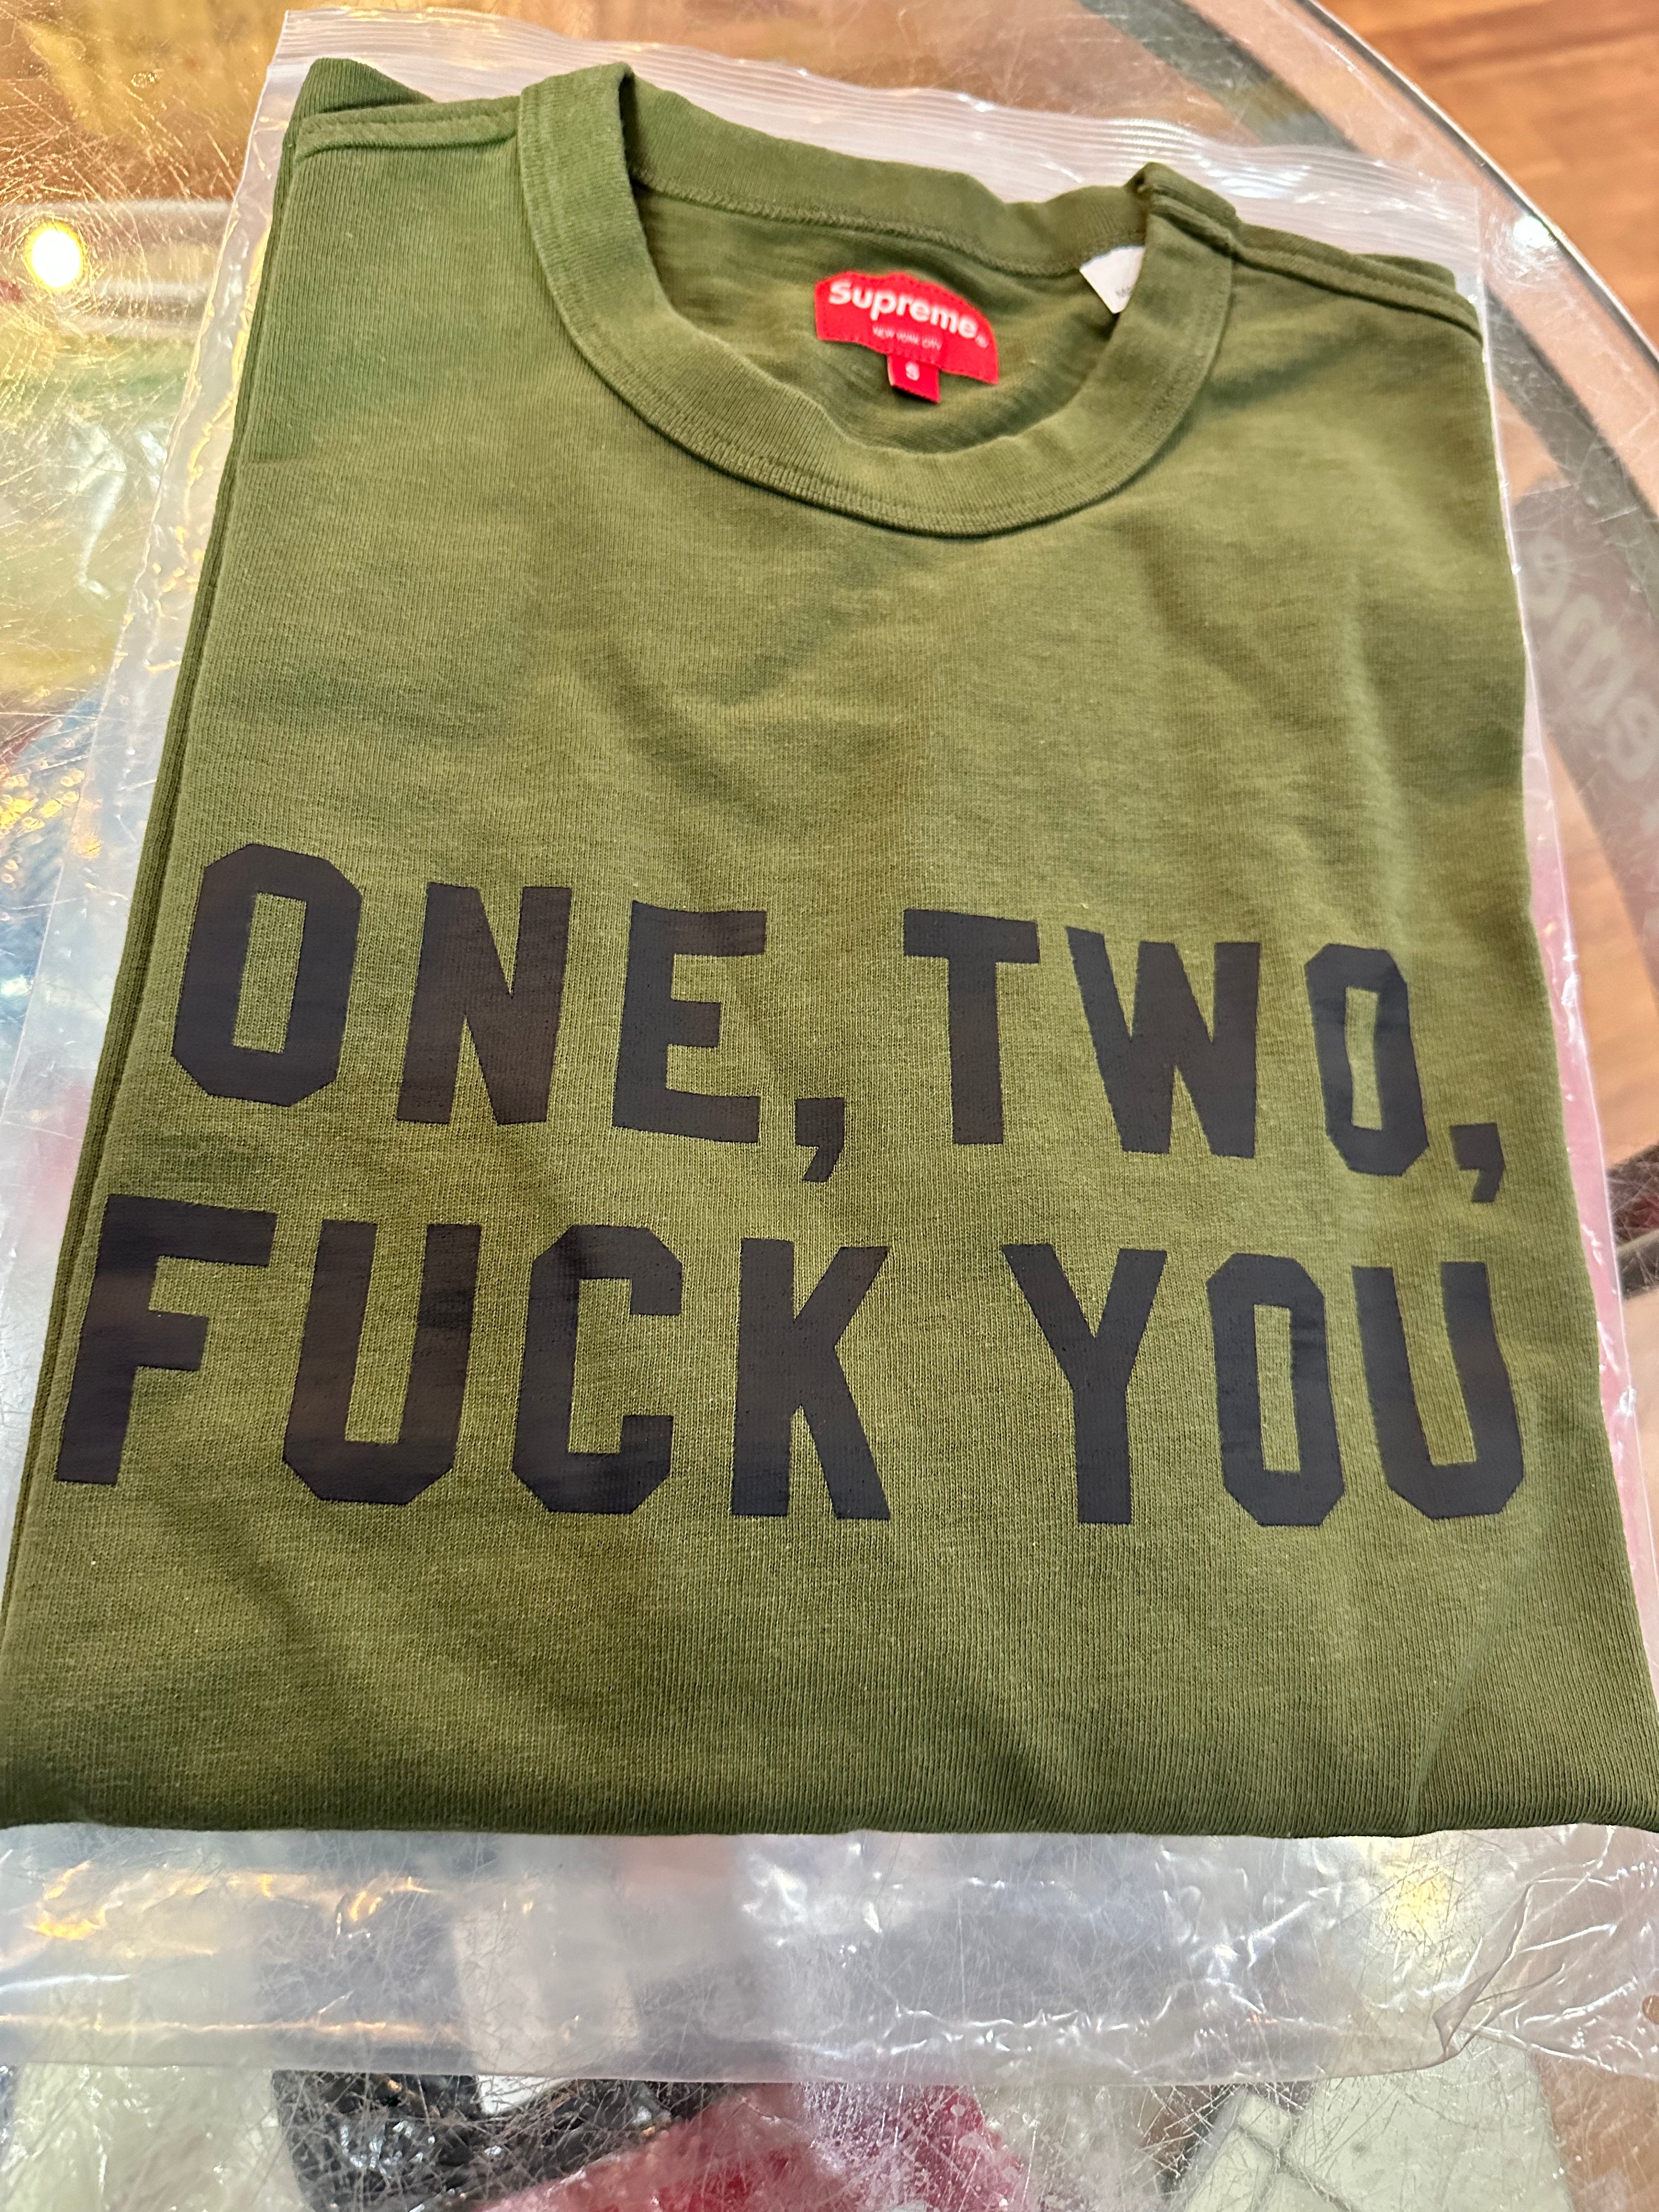 Brand new Olive Supreme One Two F*** You Short Sleeve Size Small